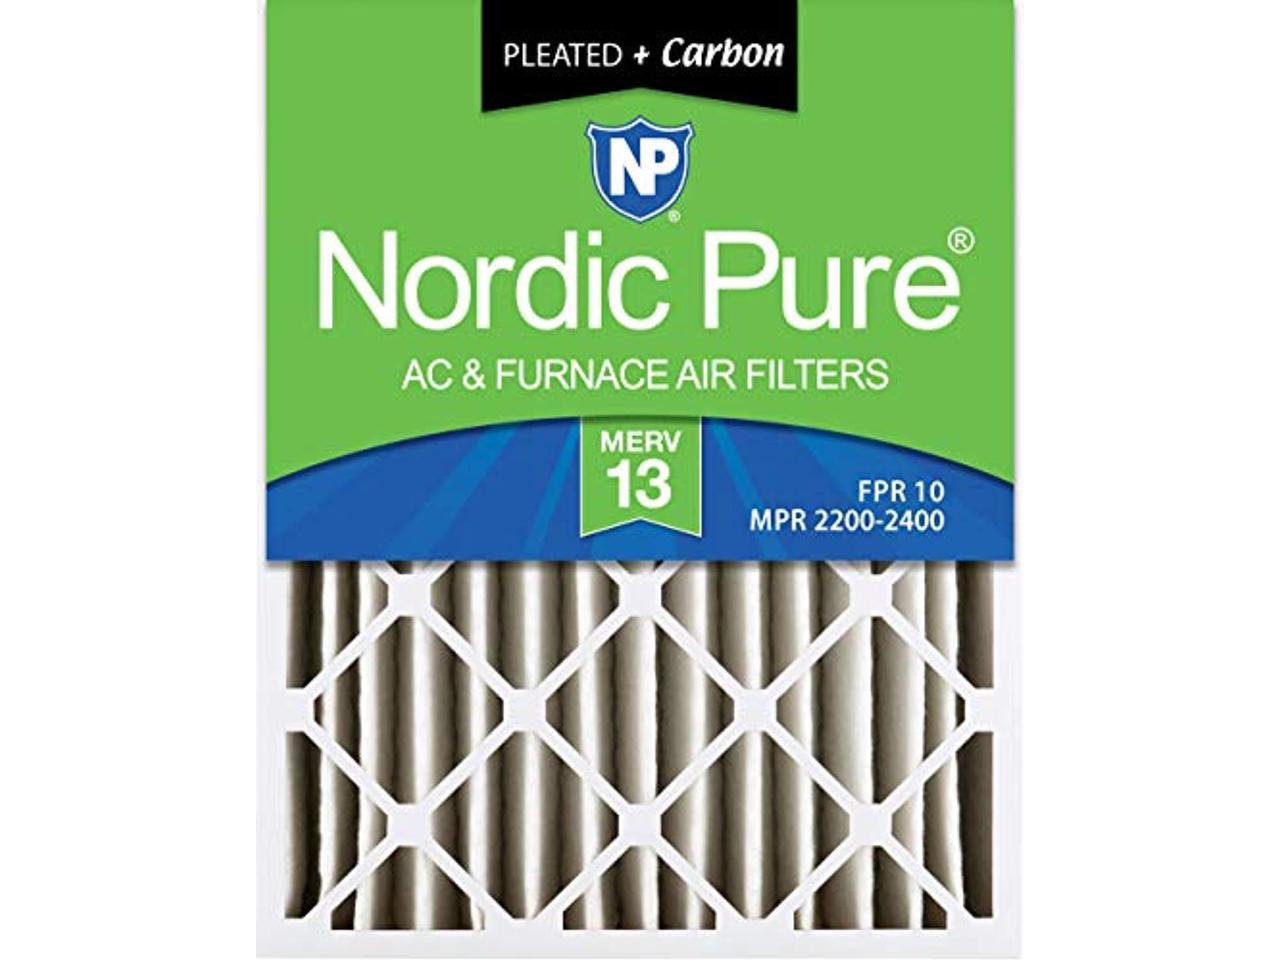 Nordic Pure 20x25x4 Box of 2 3-5//8 Actual Depth MERV 12 Pleated AC Furnace Air Filters